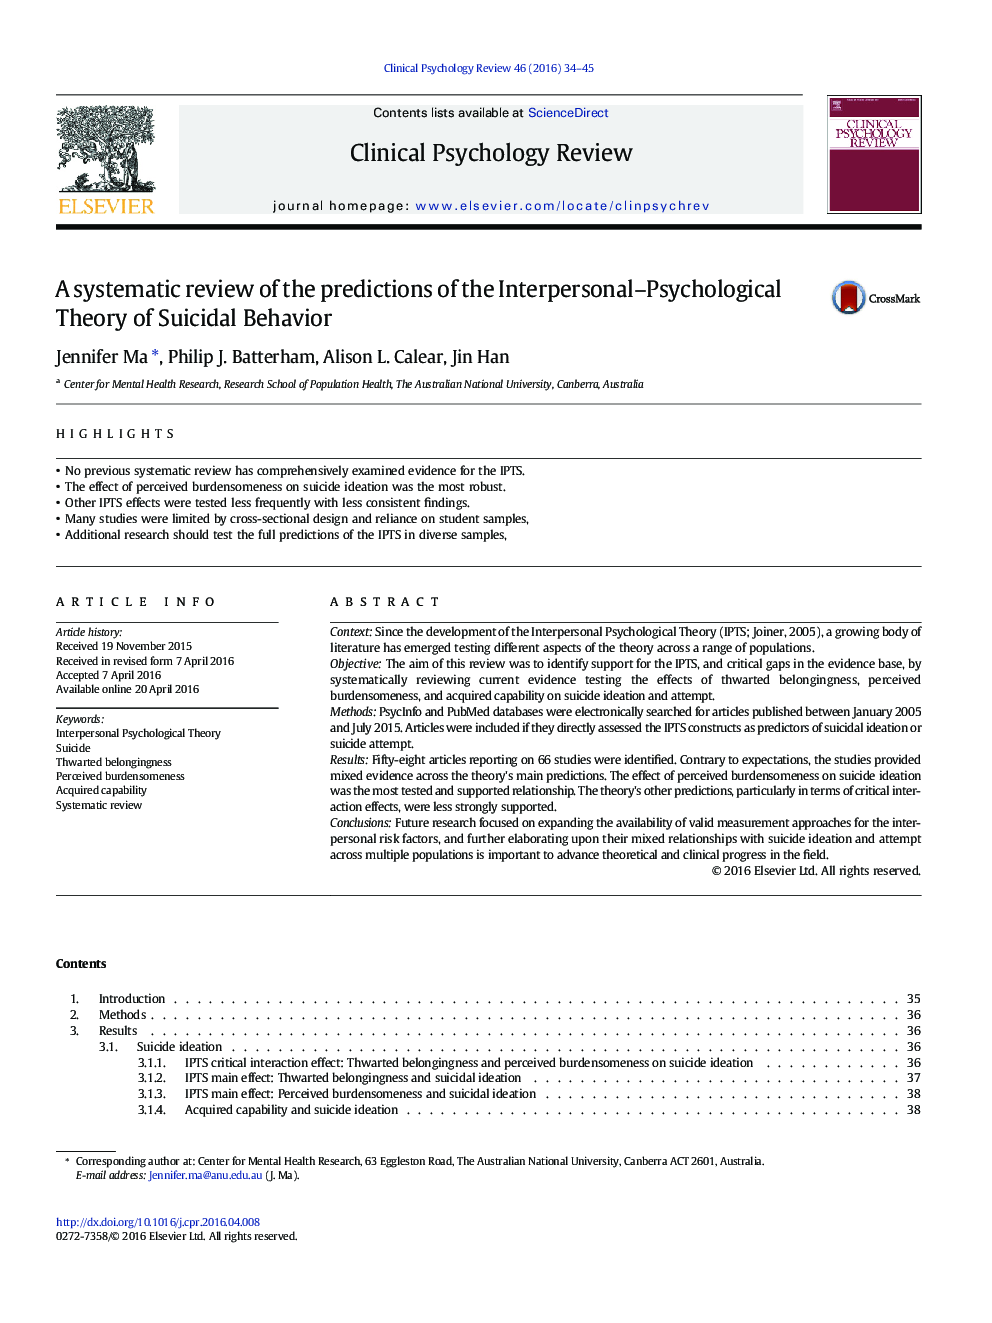 A systematic review of the predictions of the Interpersonal–Psychological Theory of Suicidal Behavior